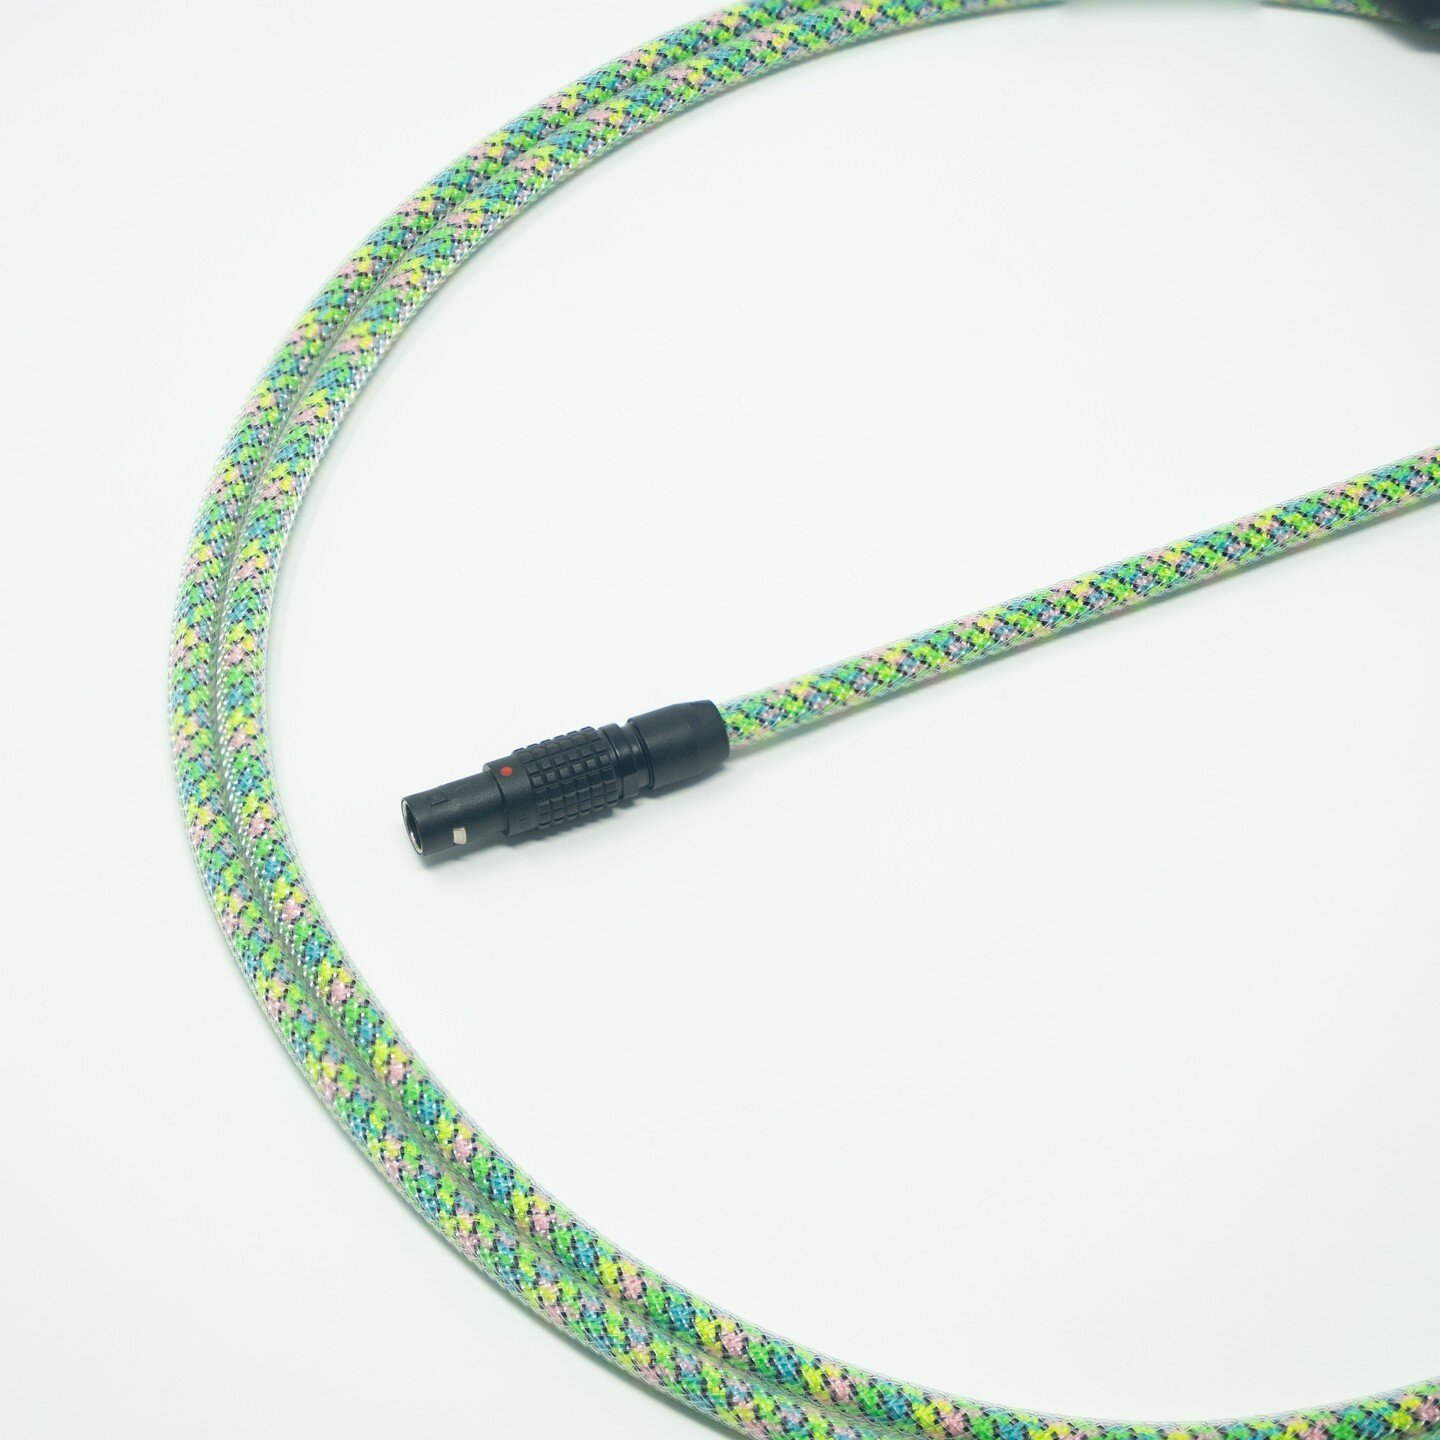 We know that touching grass means less time working on keyboards, but we're excited for Spring nontheless. 

On that note, today we've got a fabulously springy themed cable with bright pastels represented in this &quot;Party&quot; paracord and covere